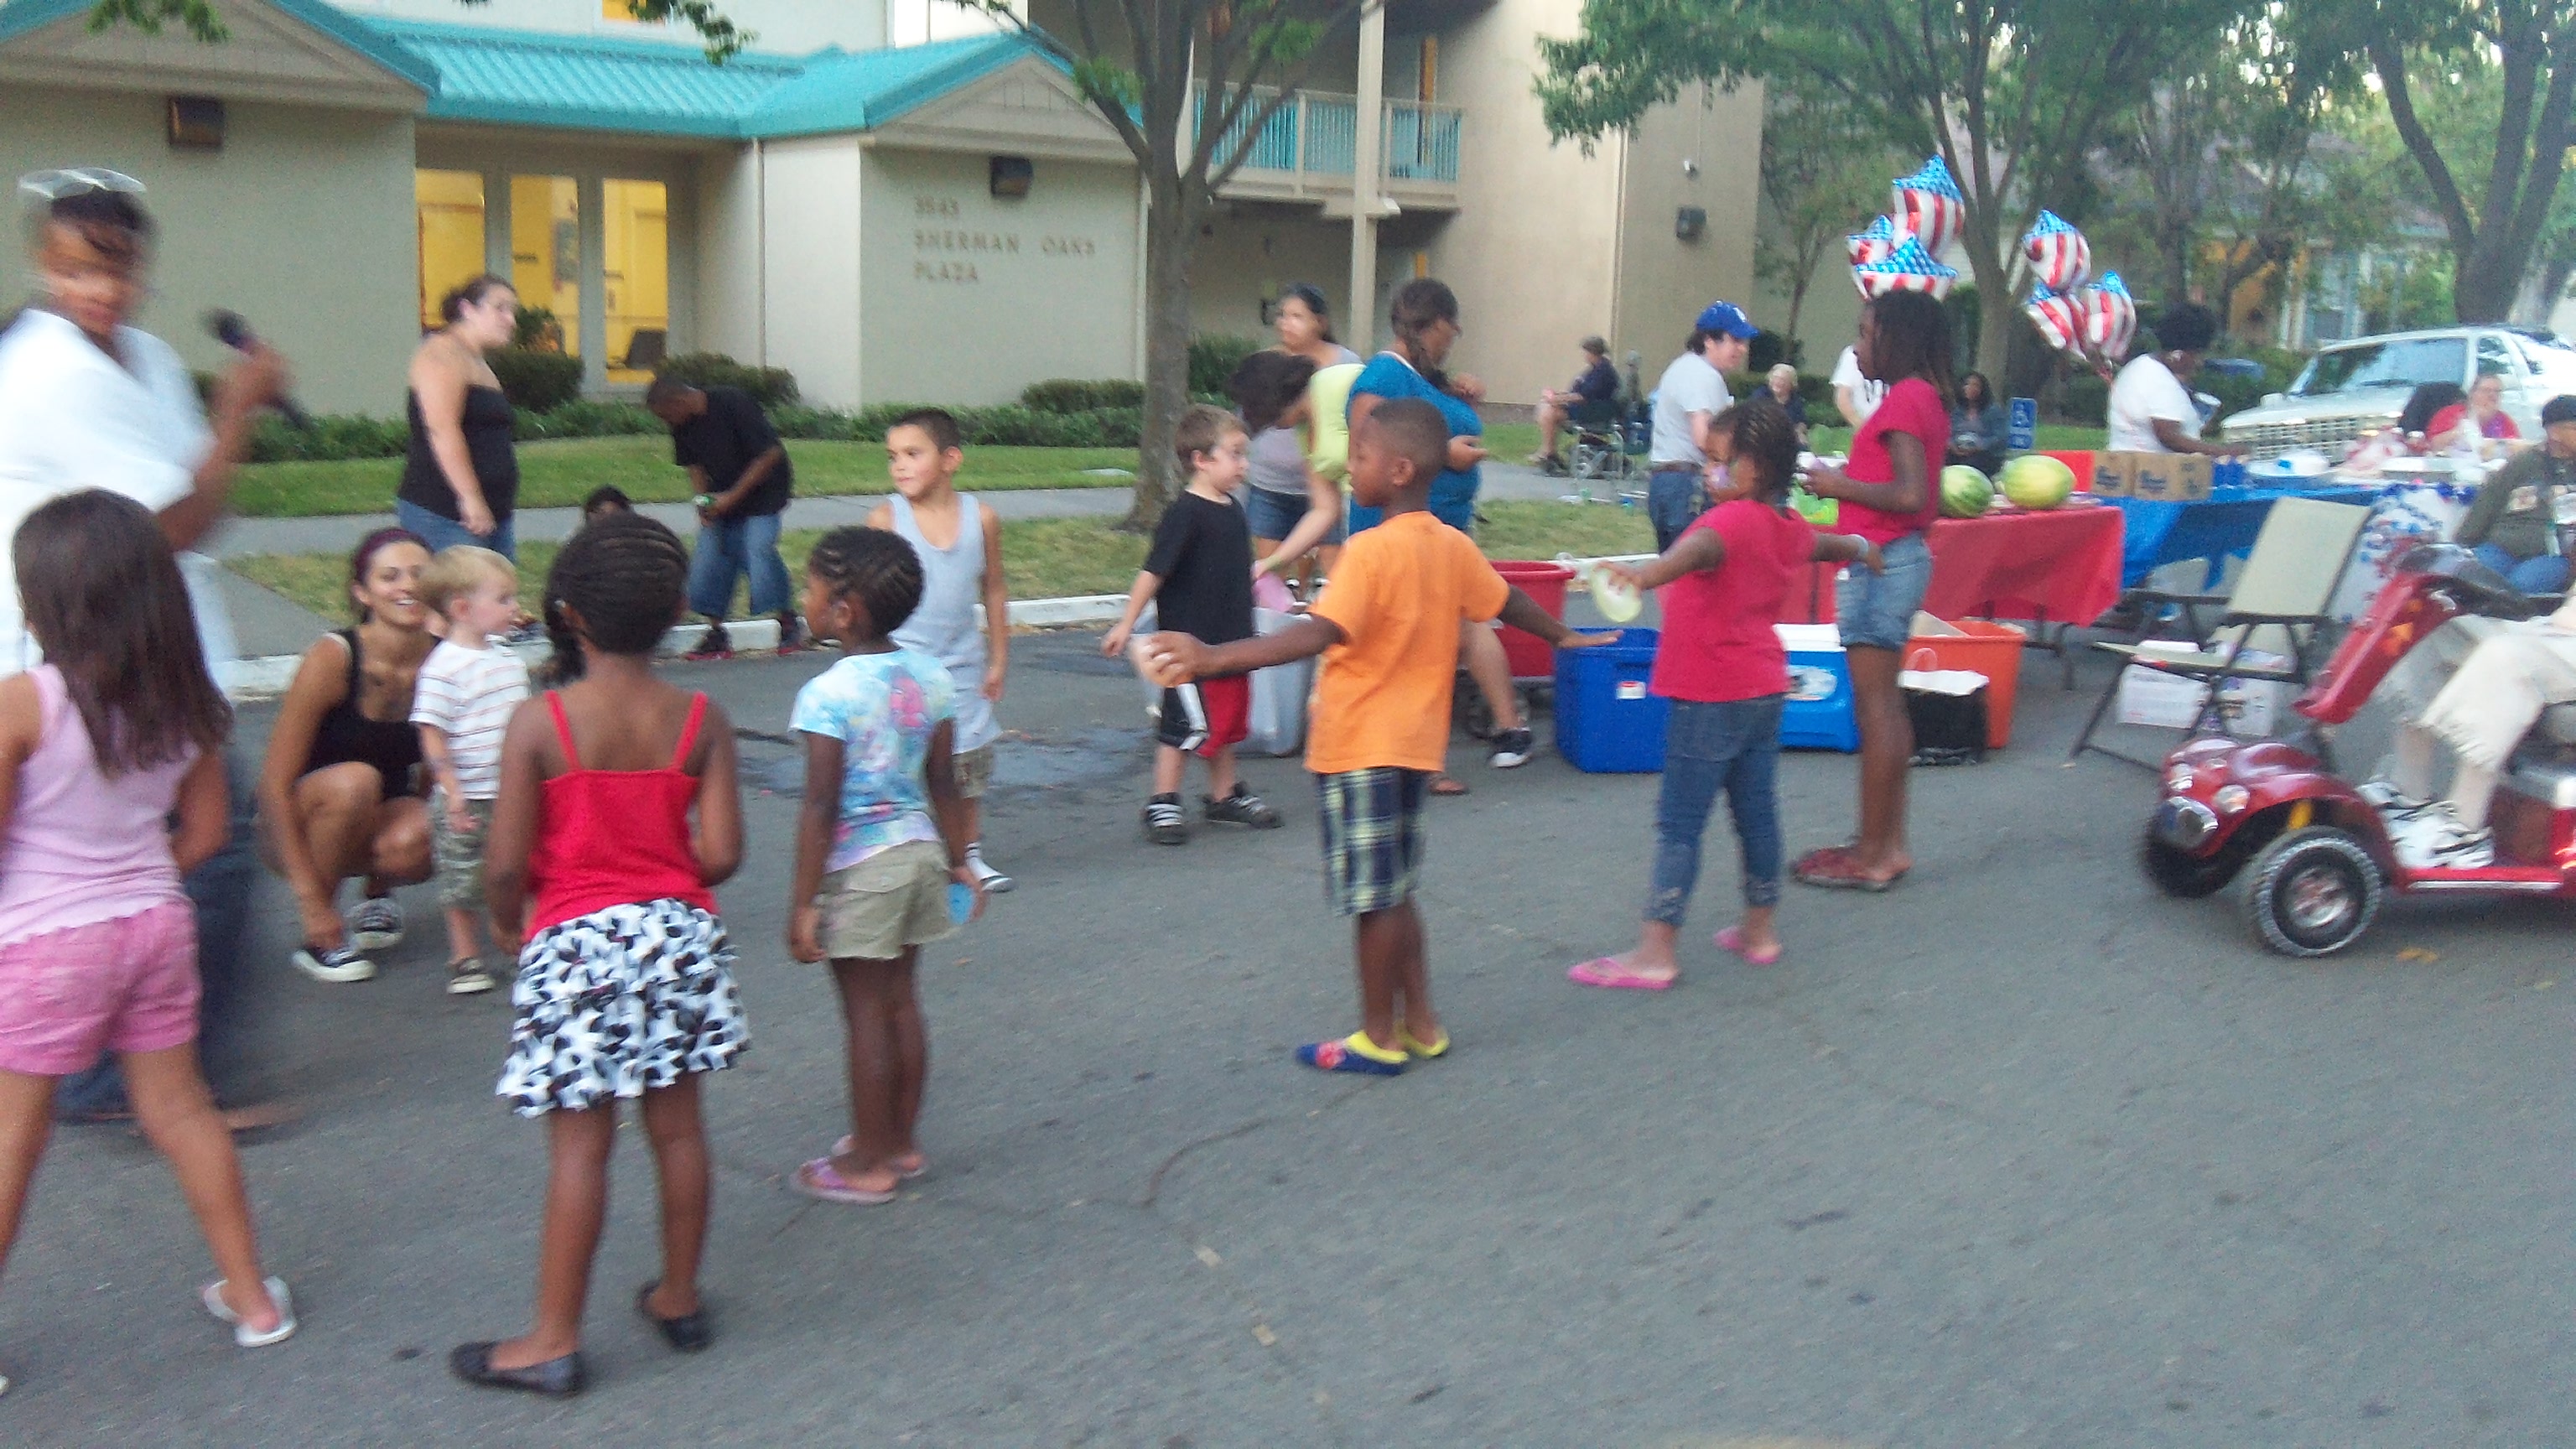 Water Balloon Toss at 1st Av-Y St 2011 National Night Out